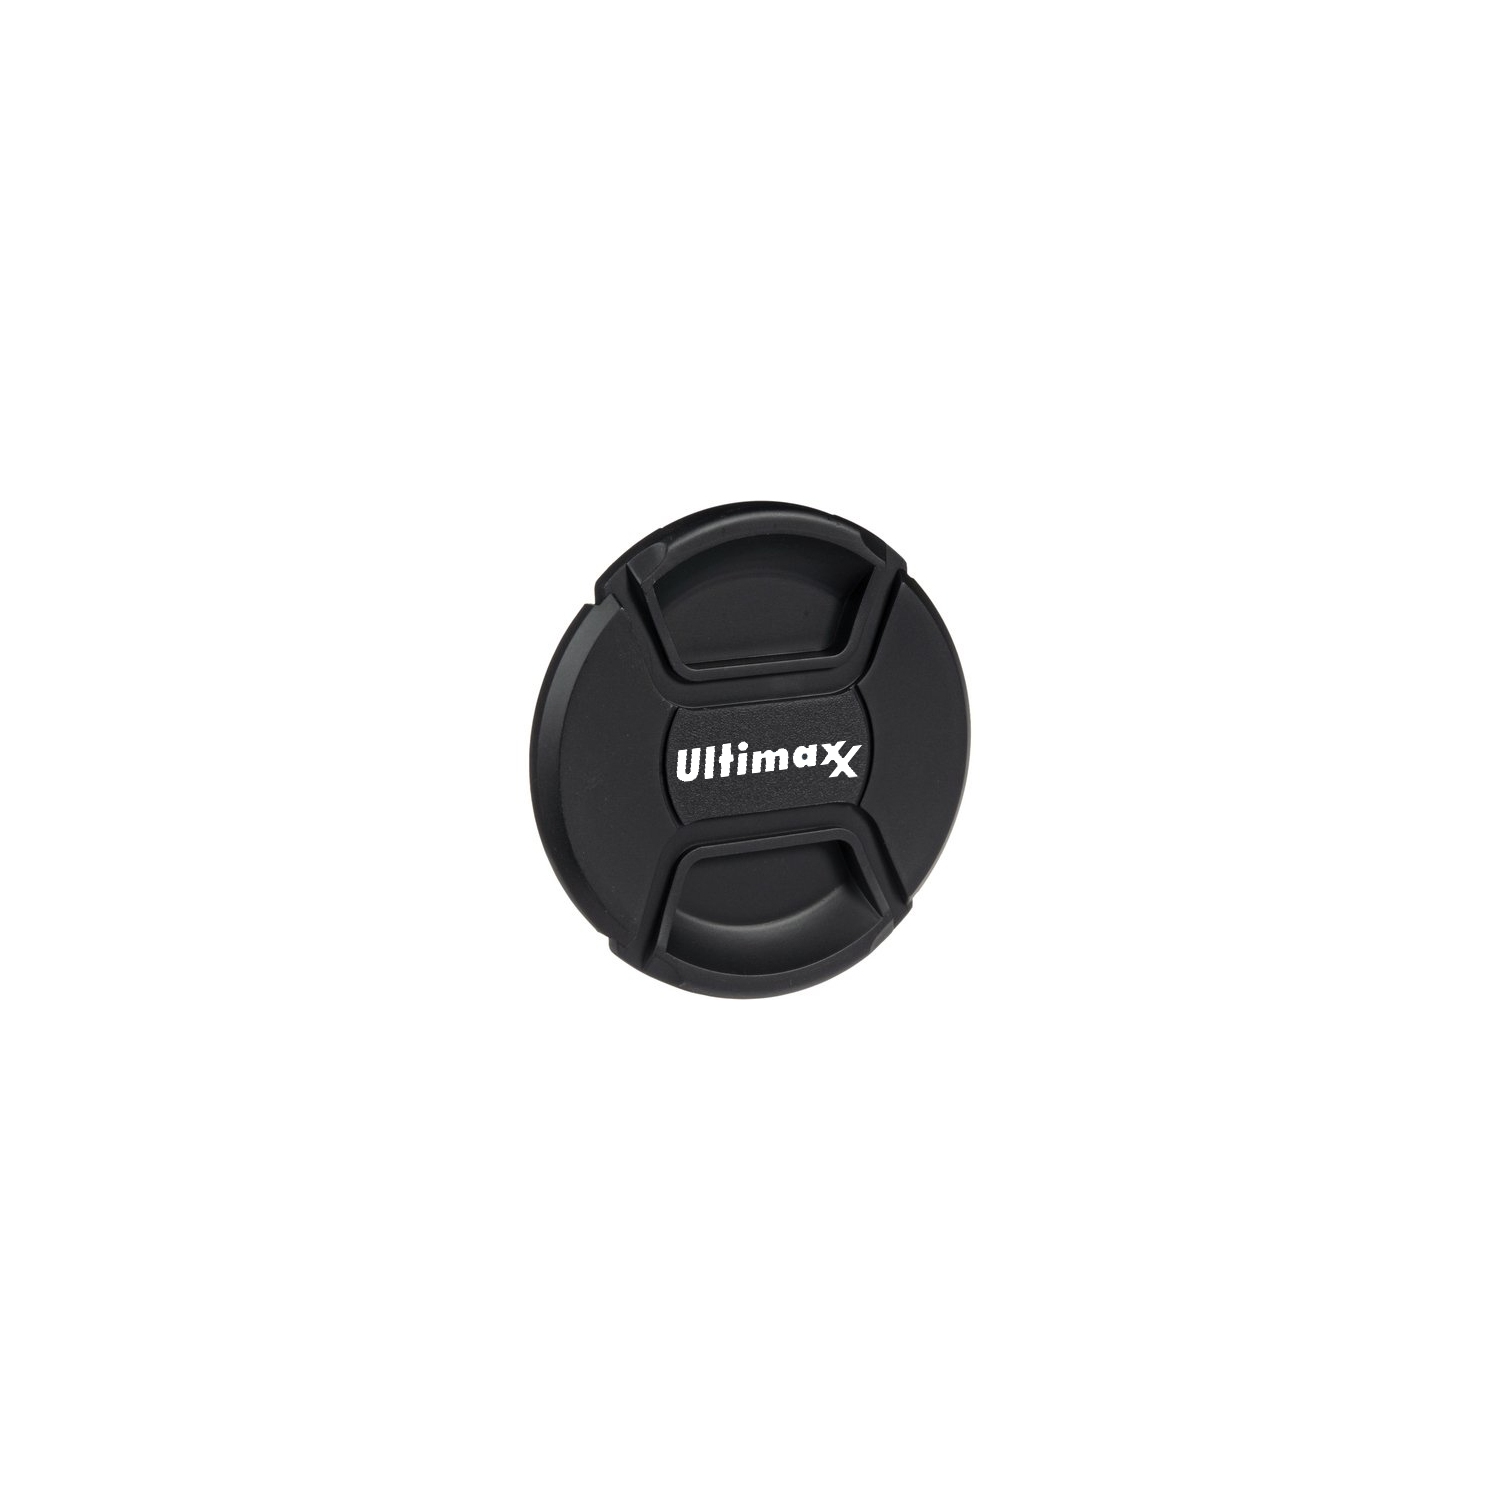 Ultimaxx 82mm Snap-On Pinch Lens Cap, Camera Lens Protection Cover for Nikon, Canon, Sony And Other DSLR Cameras